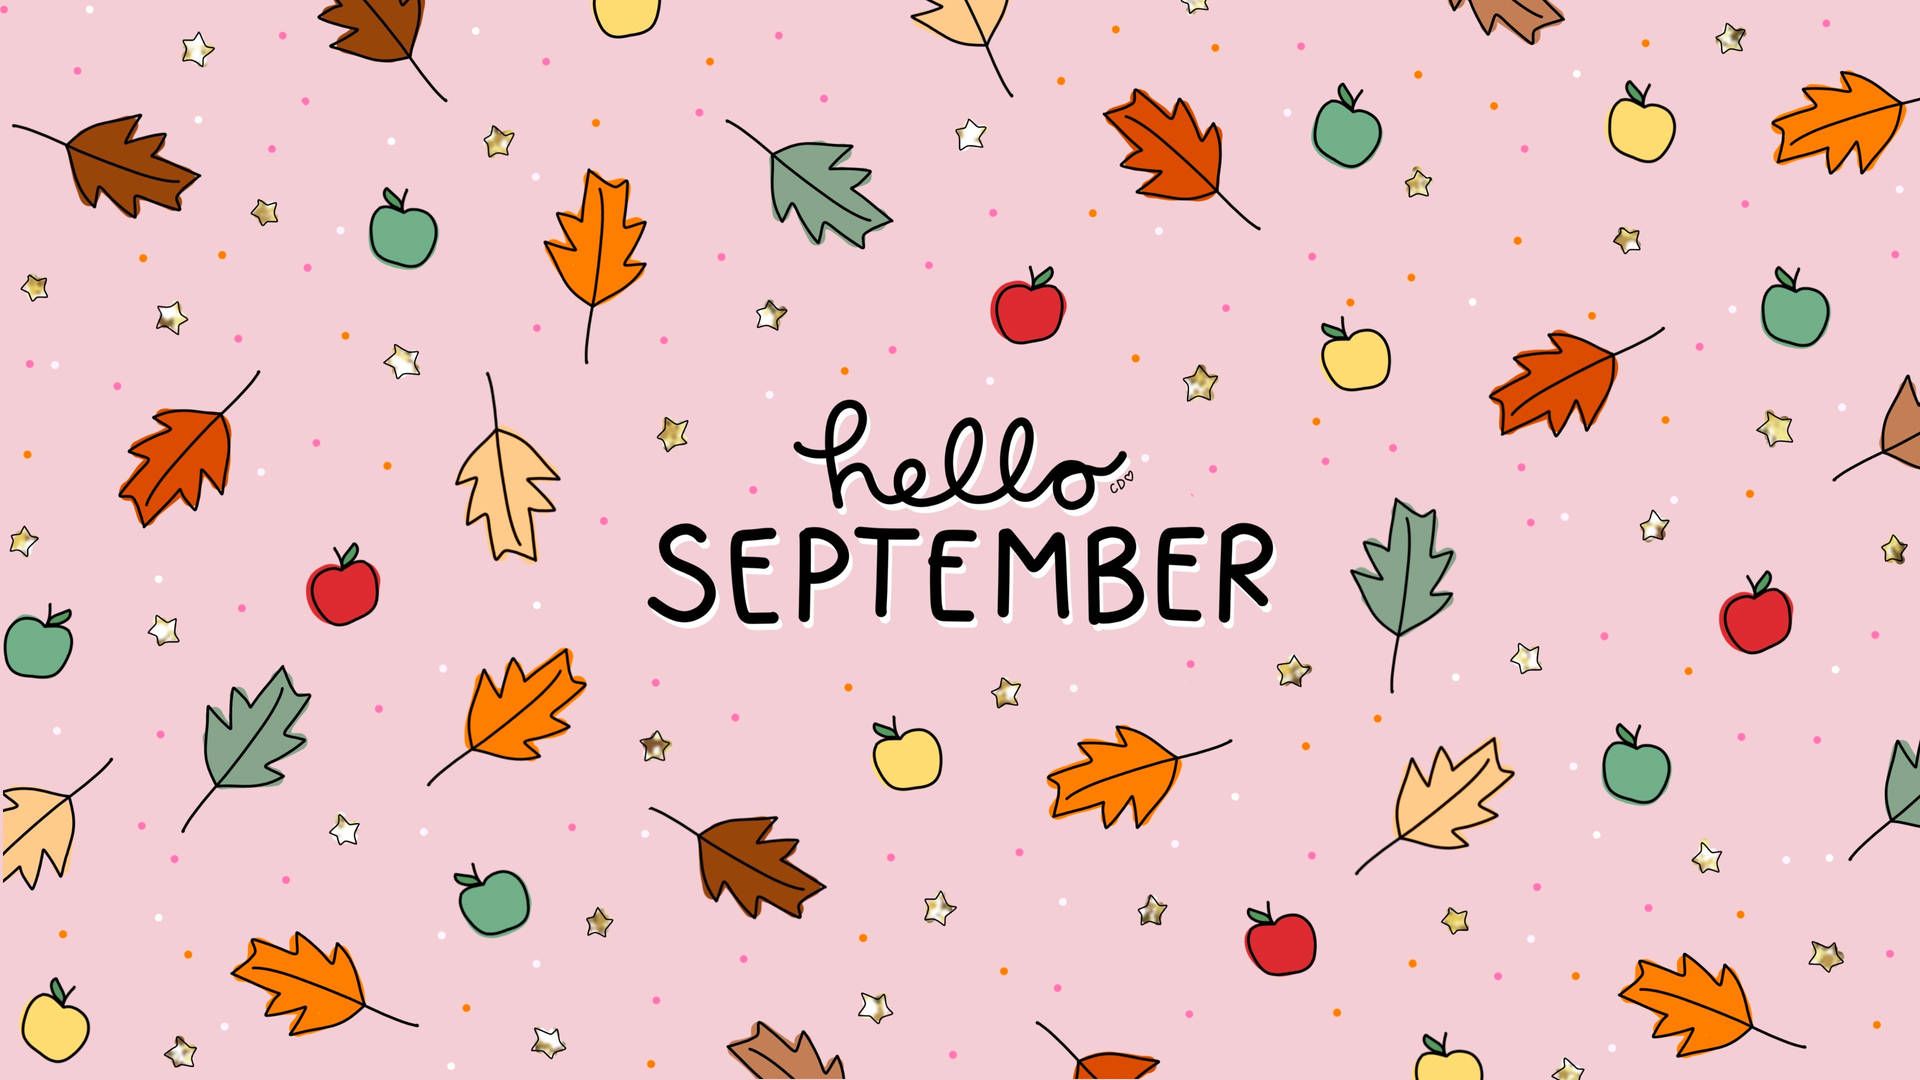 A cute wallpaper with the words hello September surrounded by leaves and apples on a pink background - September